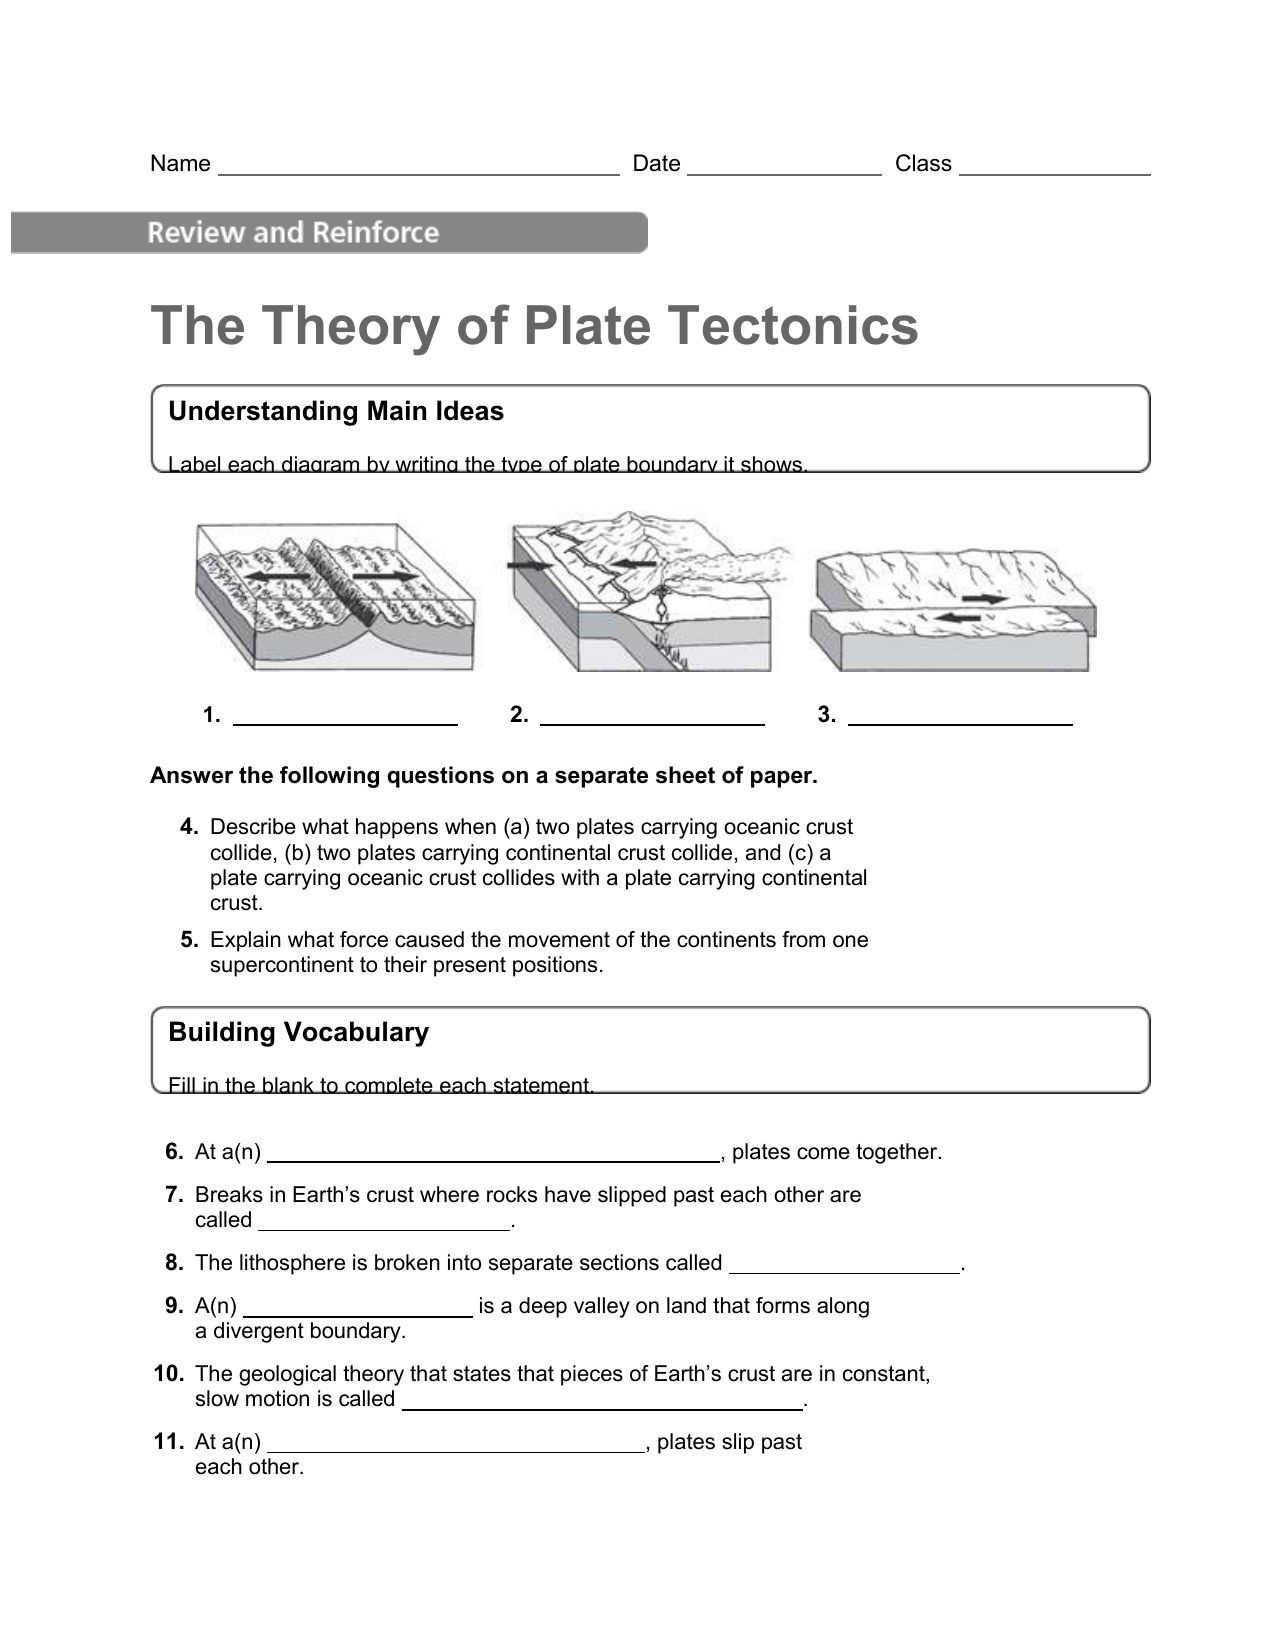 The Theory of Plate Tectonics Homework With Plate Tectonics Worksheet Answers